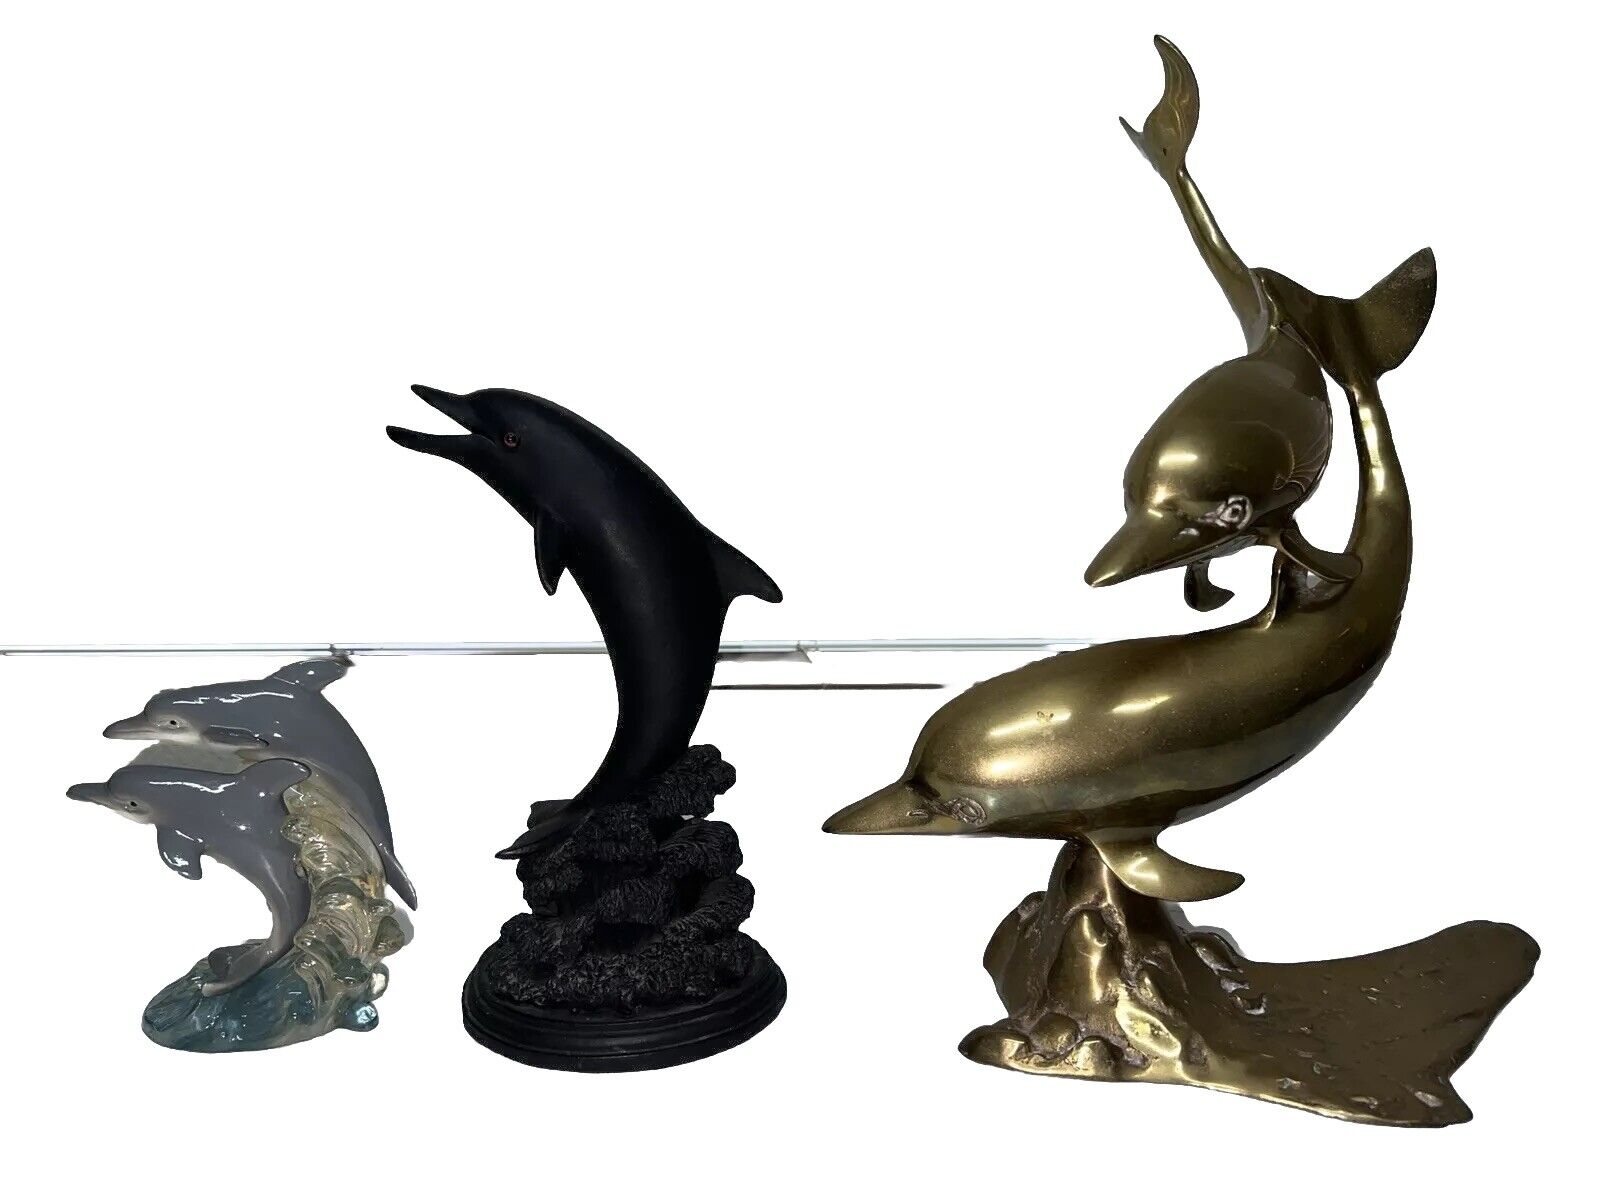 Vintage Dolphin LOT OF 3 Brass & Resin Sculpture Statue Beach Nautical Figurines